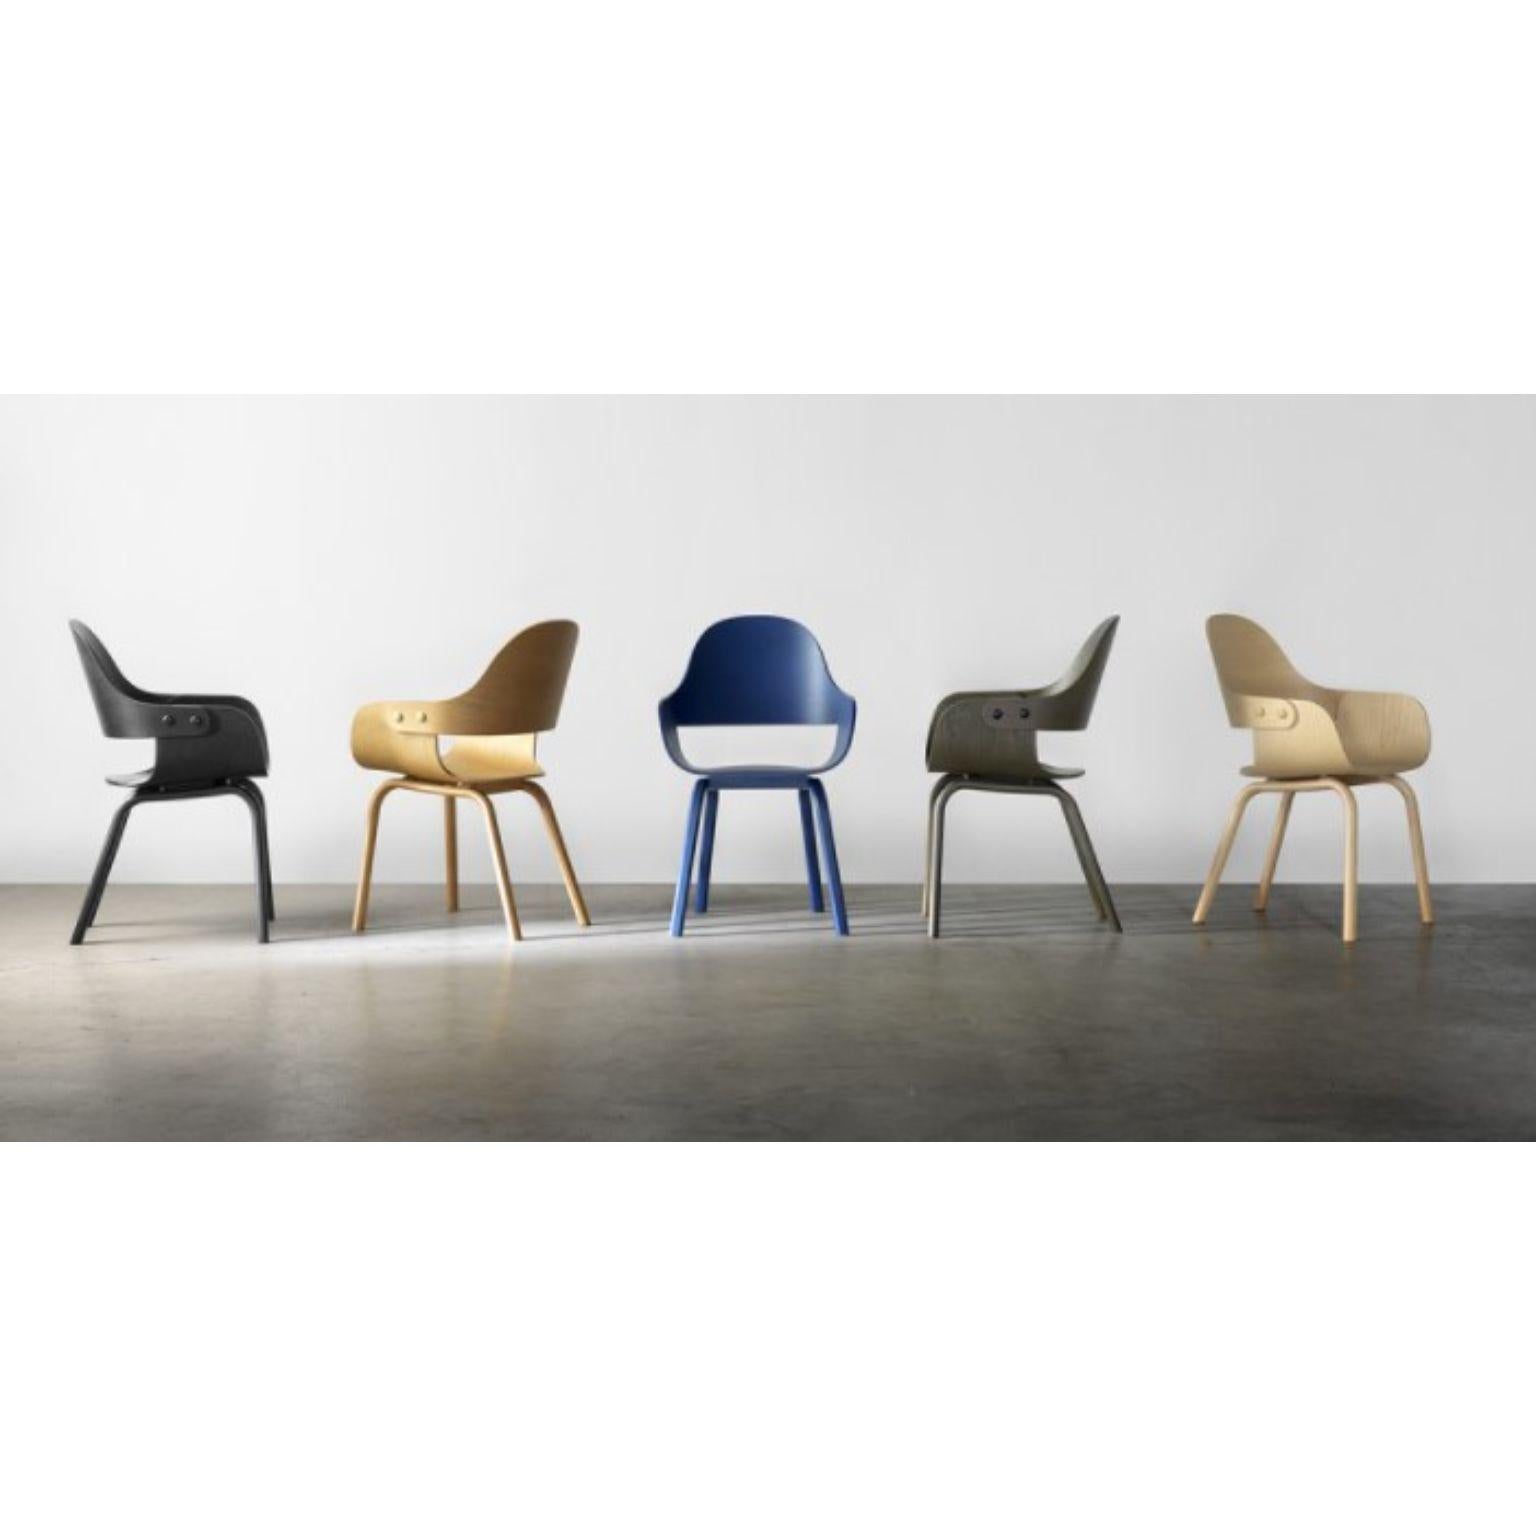 Set of 5 Showtime nude 4 legs chairs by Jaime Hayon
Dimensions: D 55 x W 55 x H 86 cm 
Materials: Powder-coated steel or aluminum structure. Legs, seat, and backrest in plywood with exteriors in natural ash, walnut, or ash stained black. Metallic